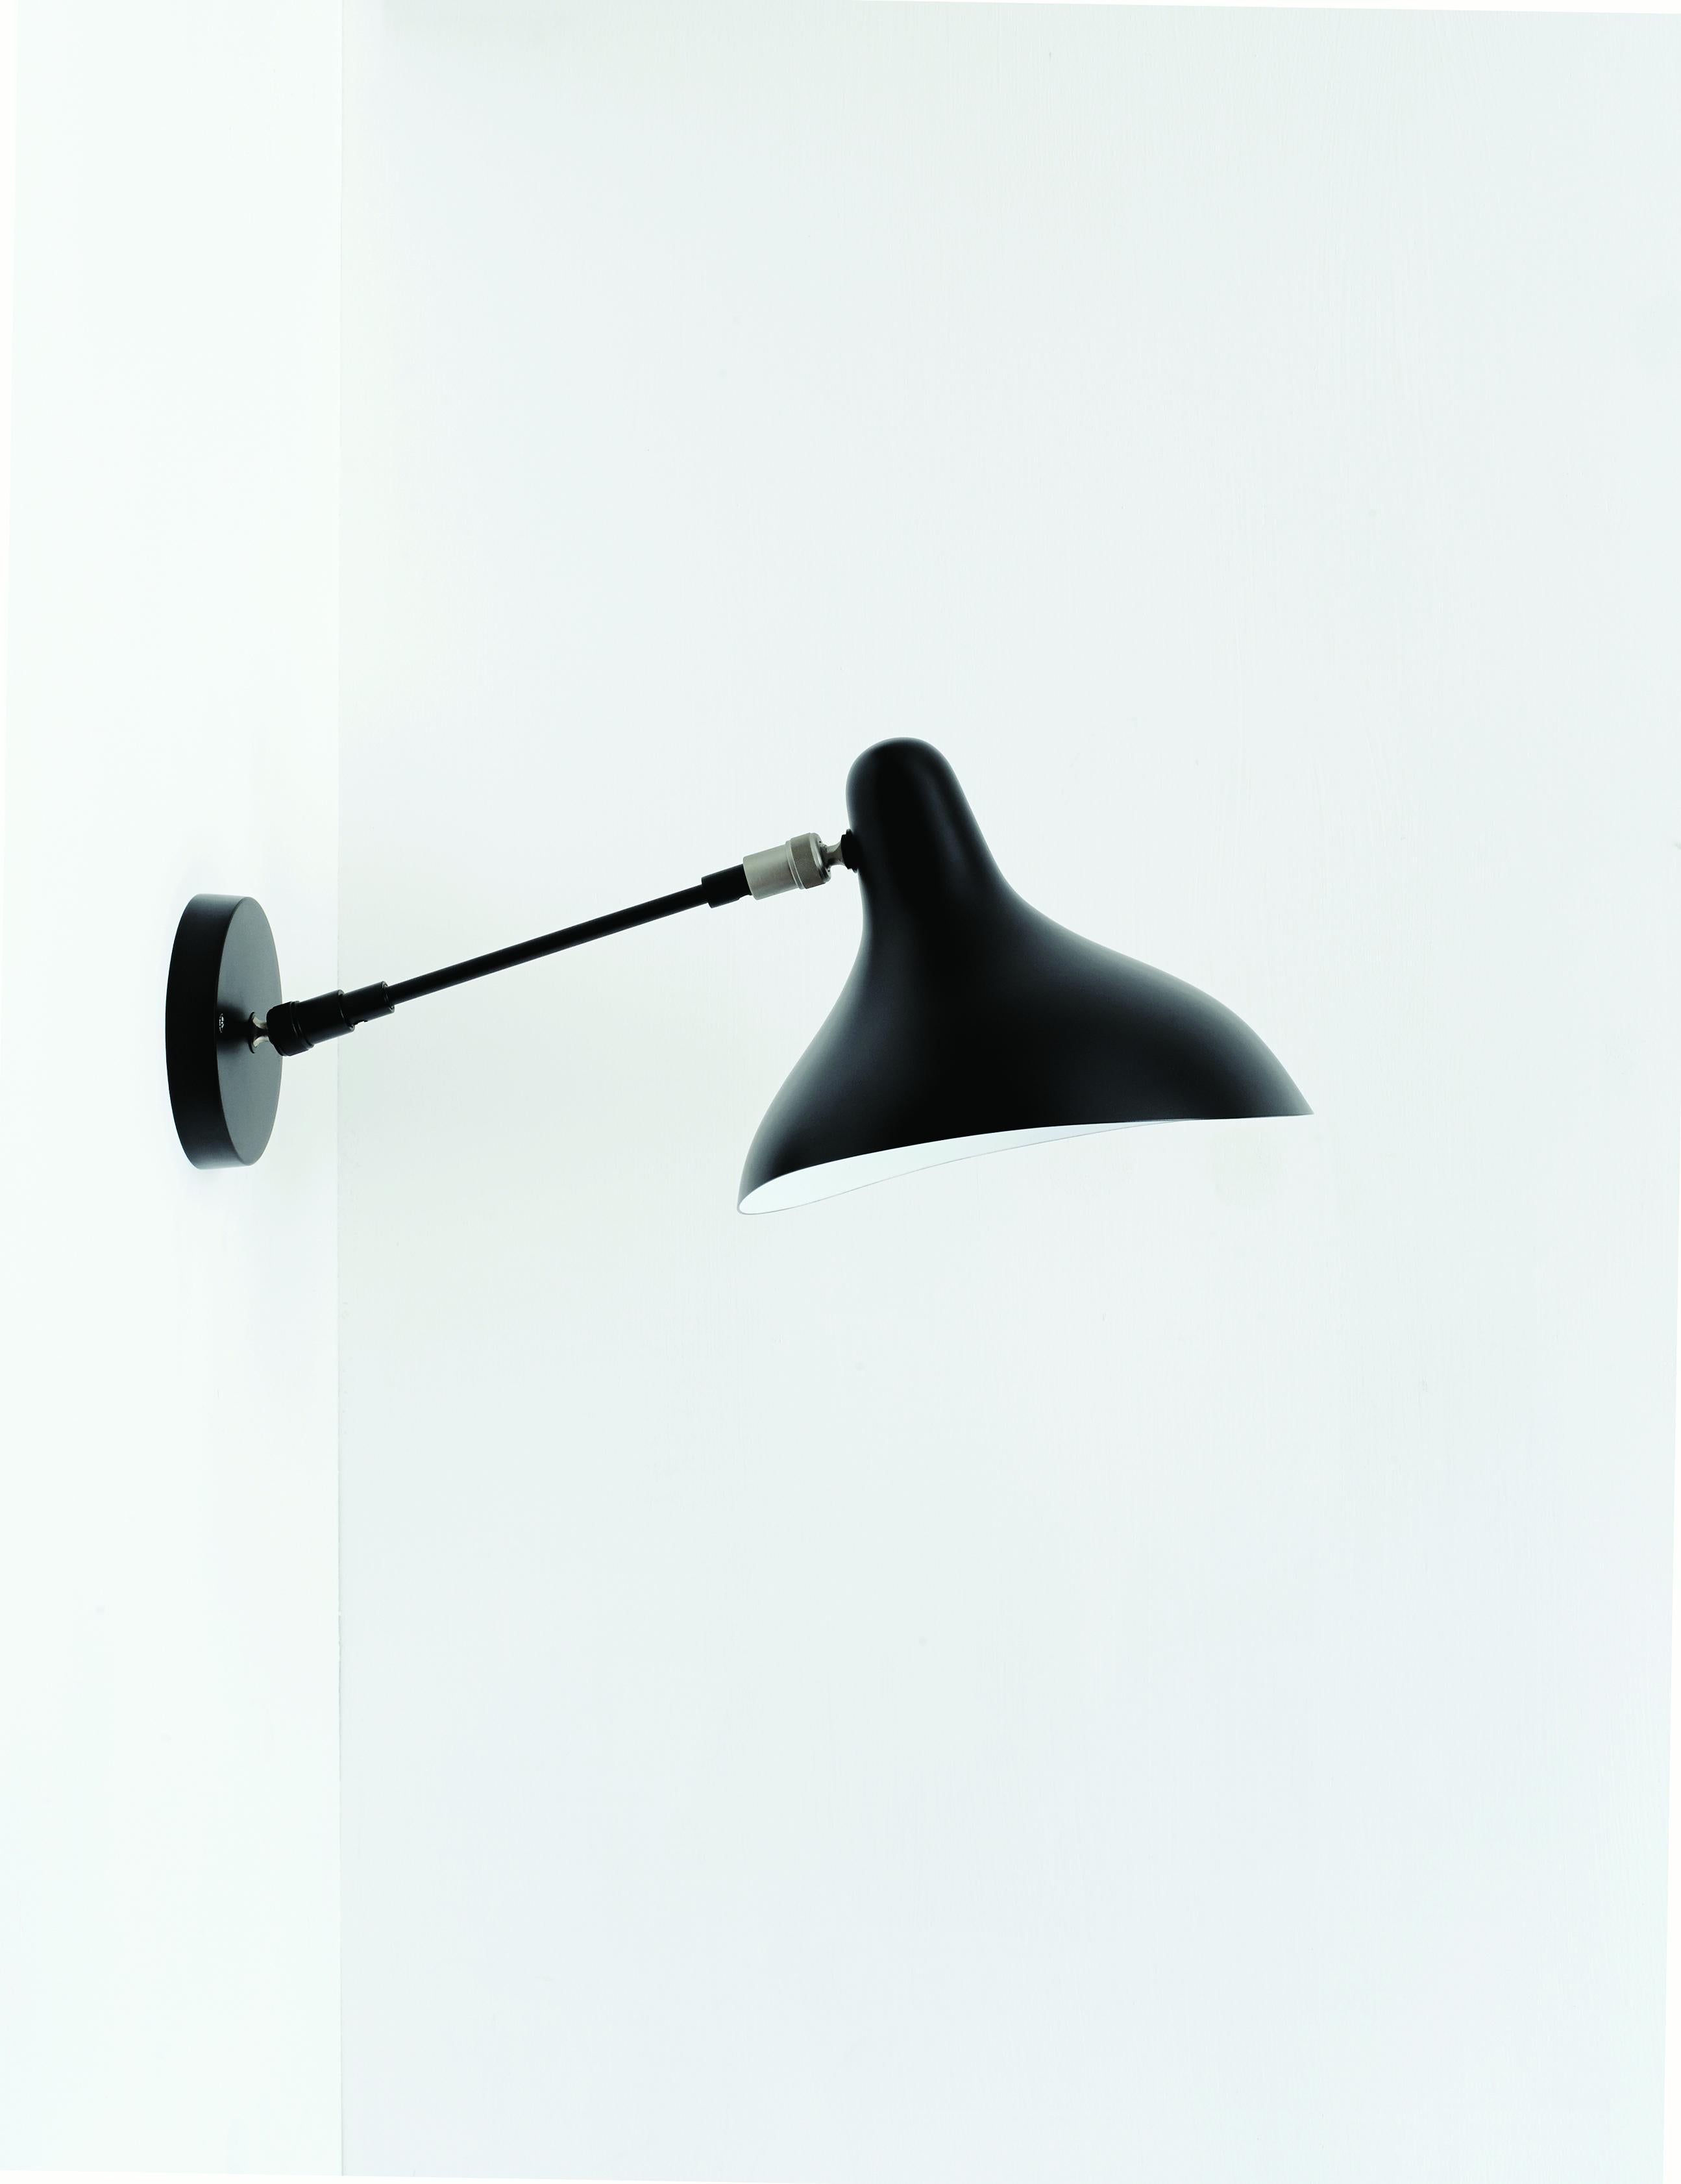 Contemporary Mantis BS5 Wall Lamp Designed in 1951 by B. Schottlander as a Tribute to Calder For Sale